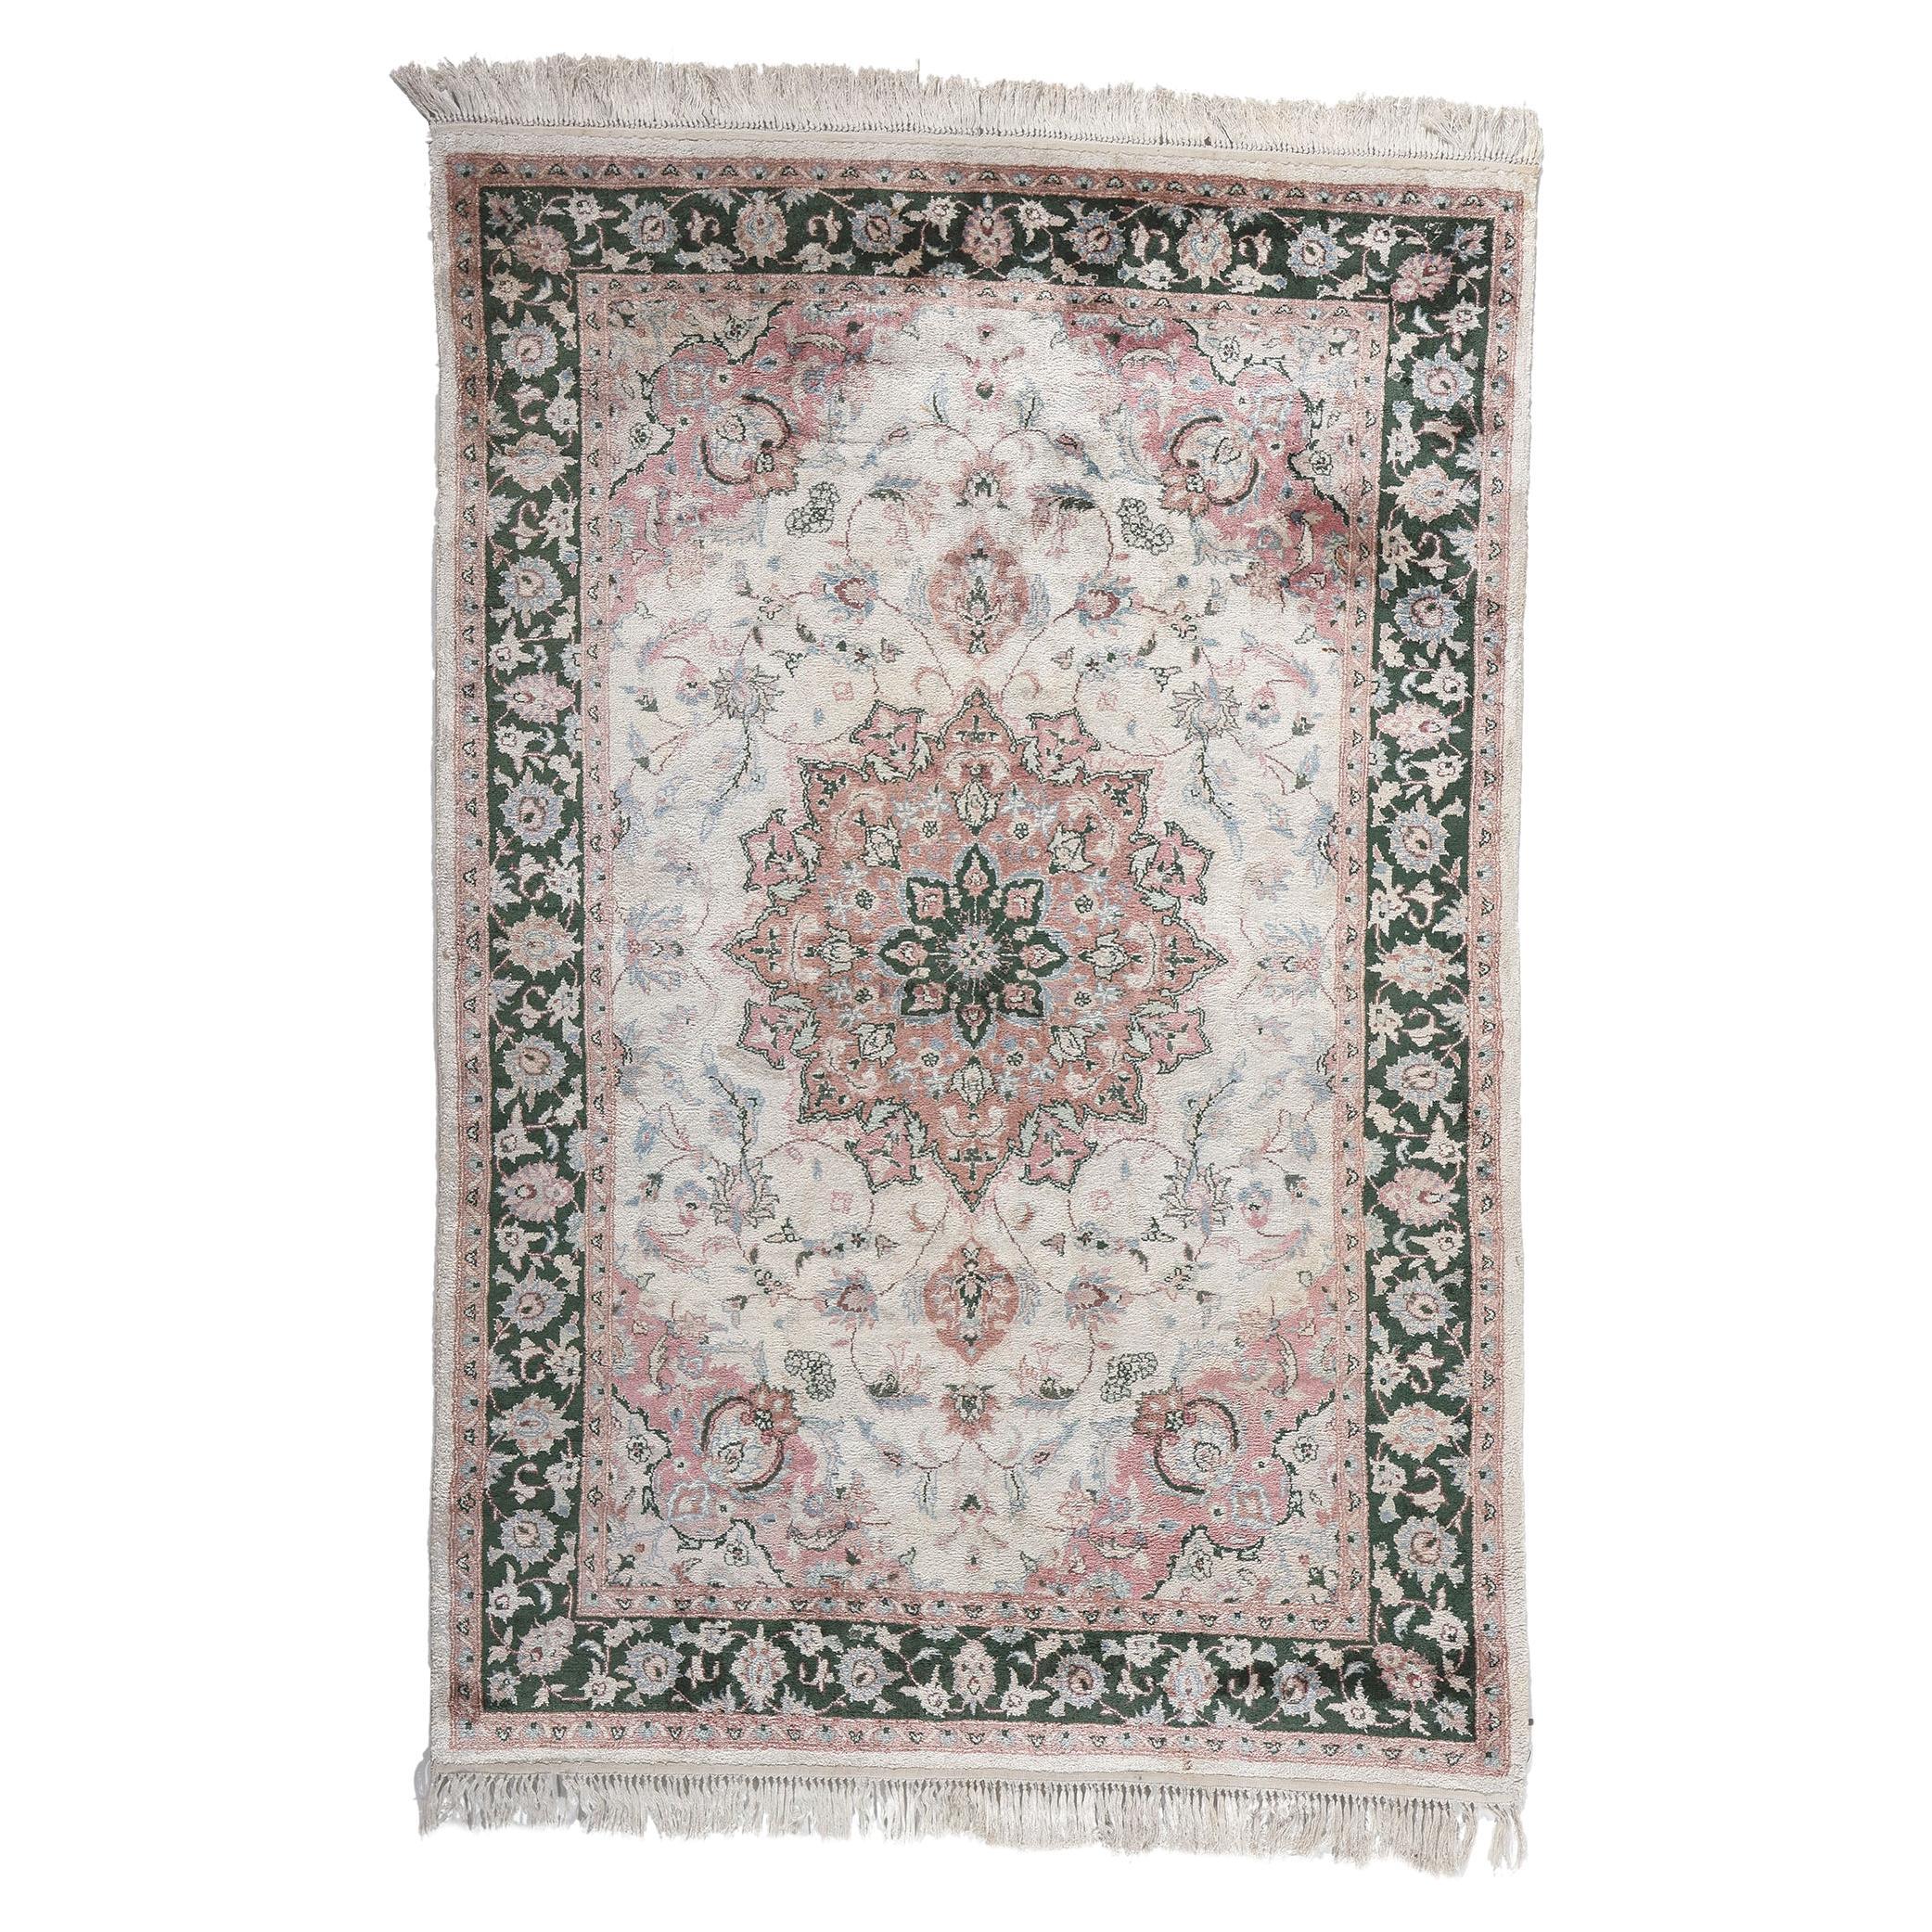 Vintage Silk Kashmir Rug, English Country Meets Luxe Style For Sale